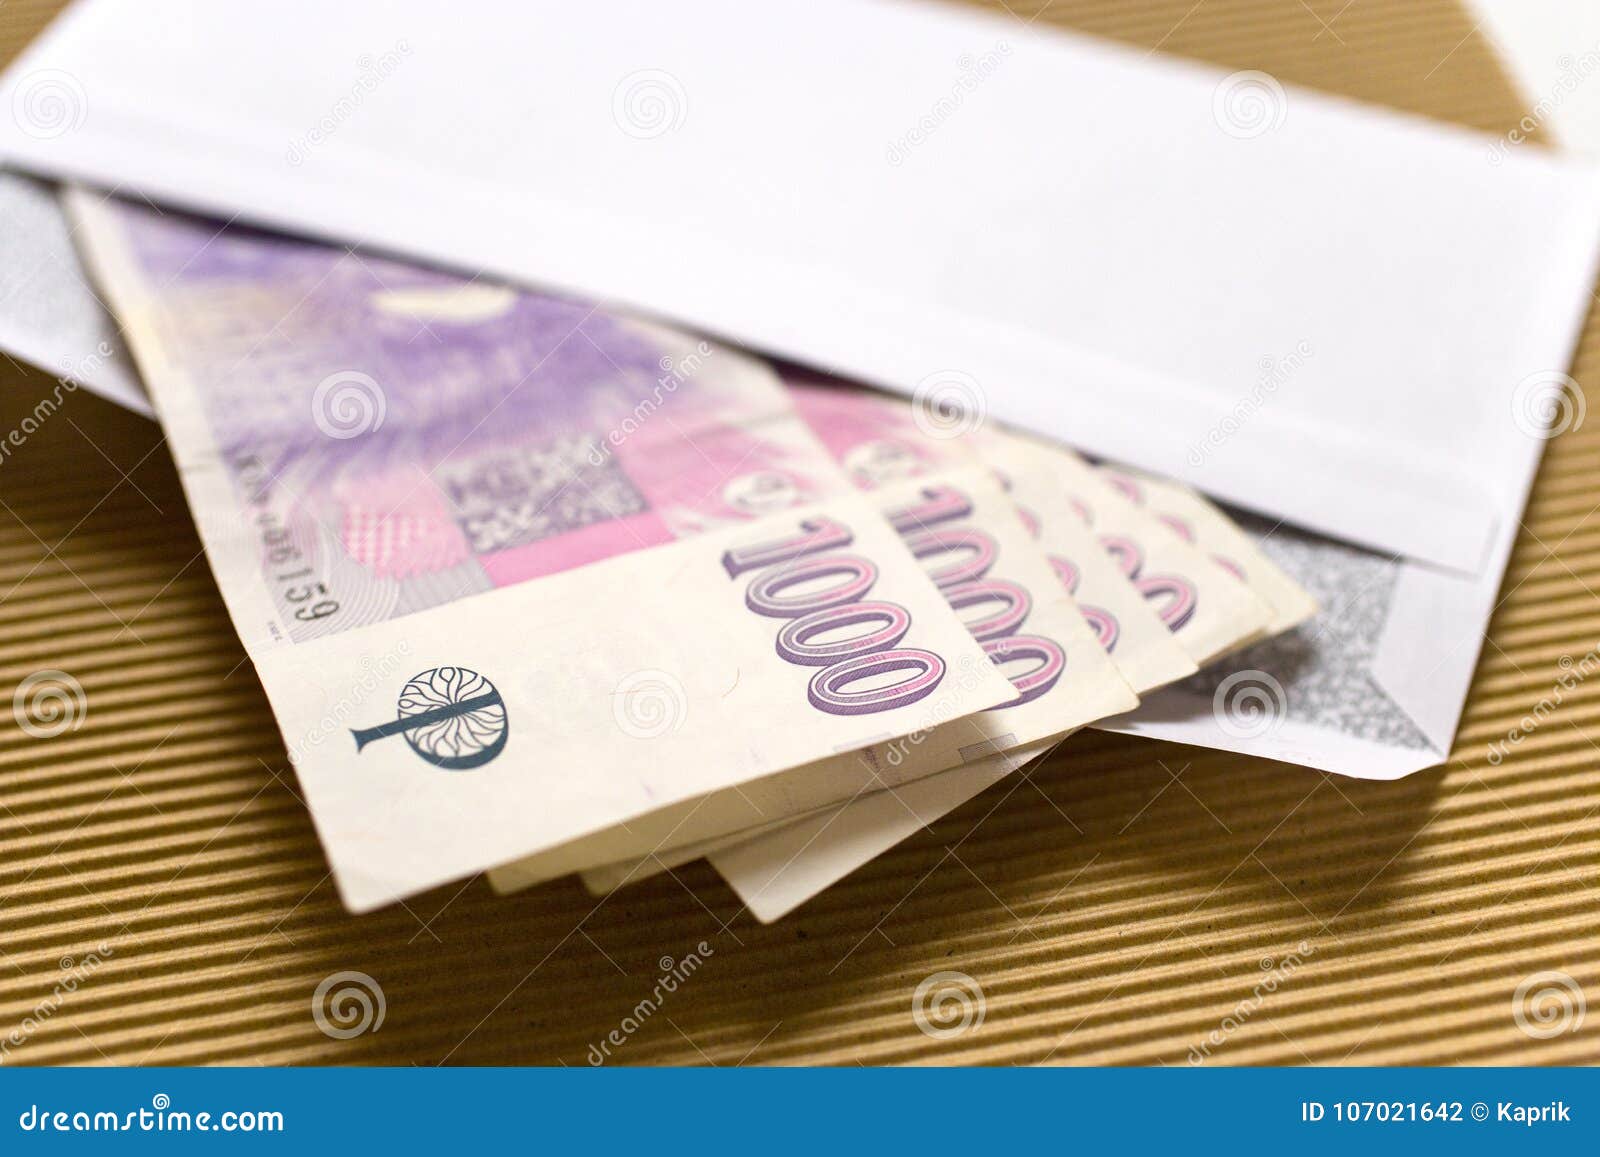 czech economy and finance - czech crown banknotes in a envelope - bribe and corruption